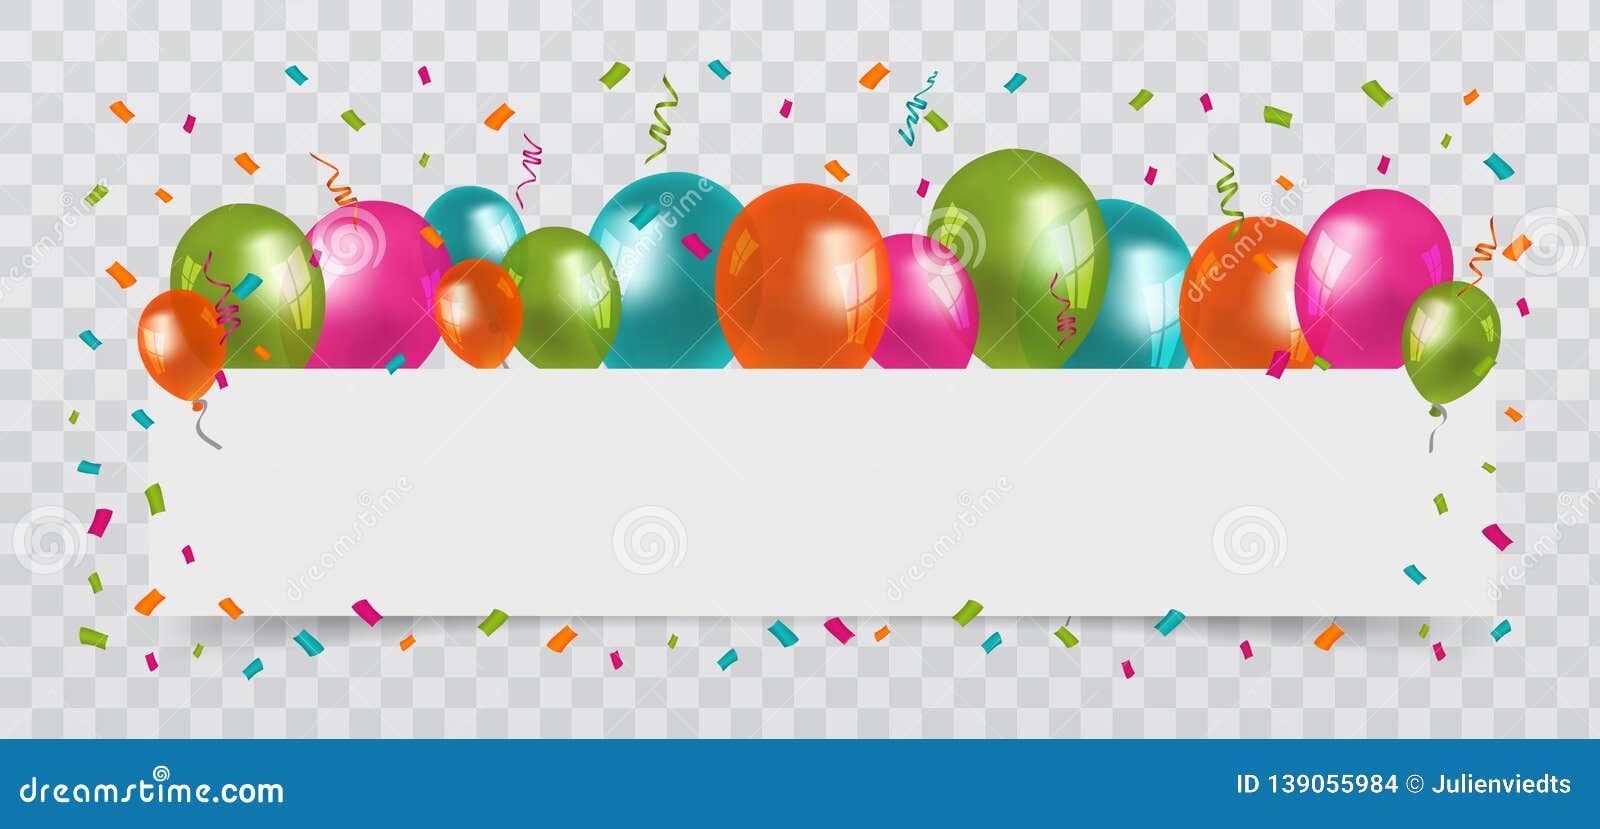 Download free photo of Confetti, curling ribbon, birthday, streamers, party  - from